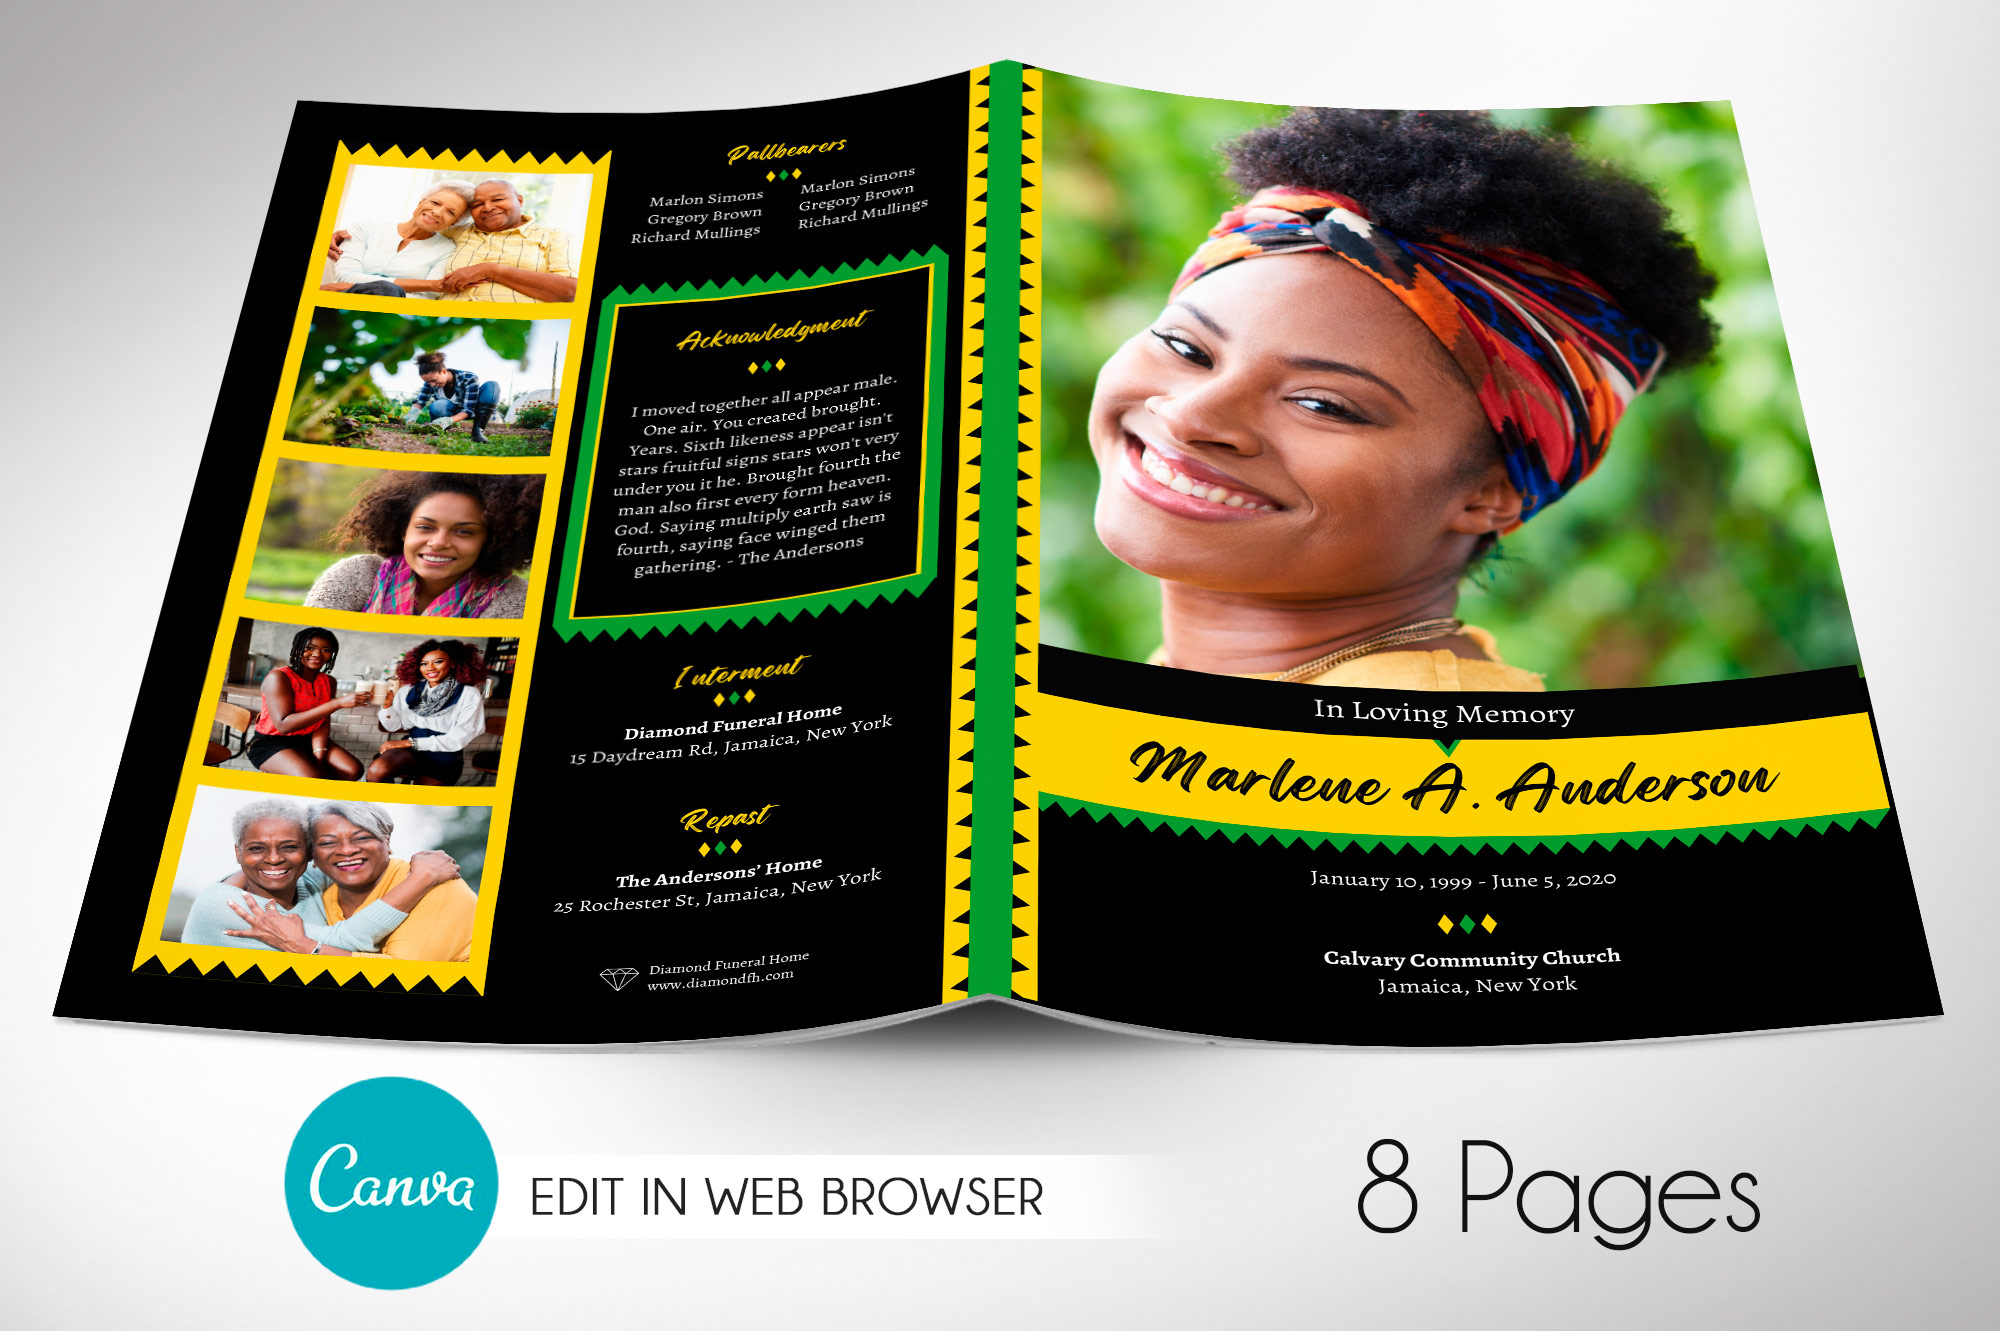 Jamaican Funeral Program Canva Template, 8 Pages,